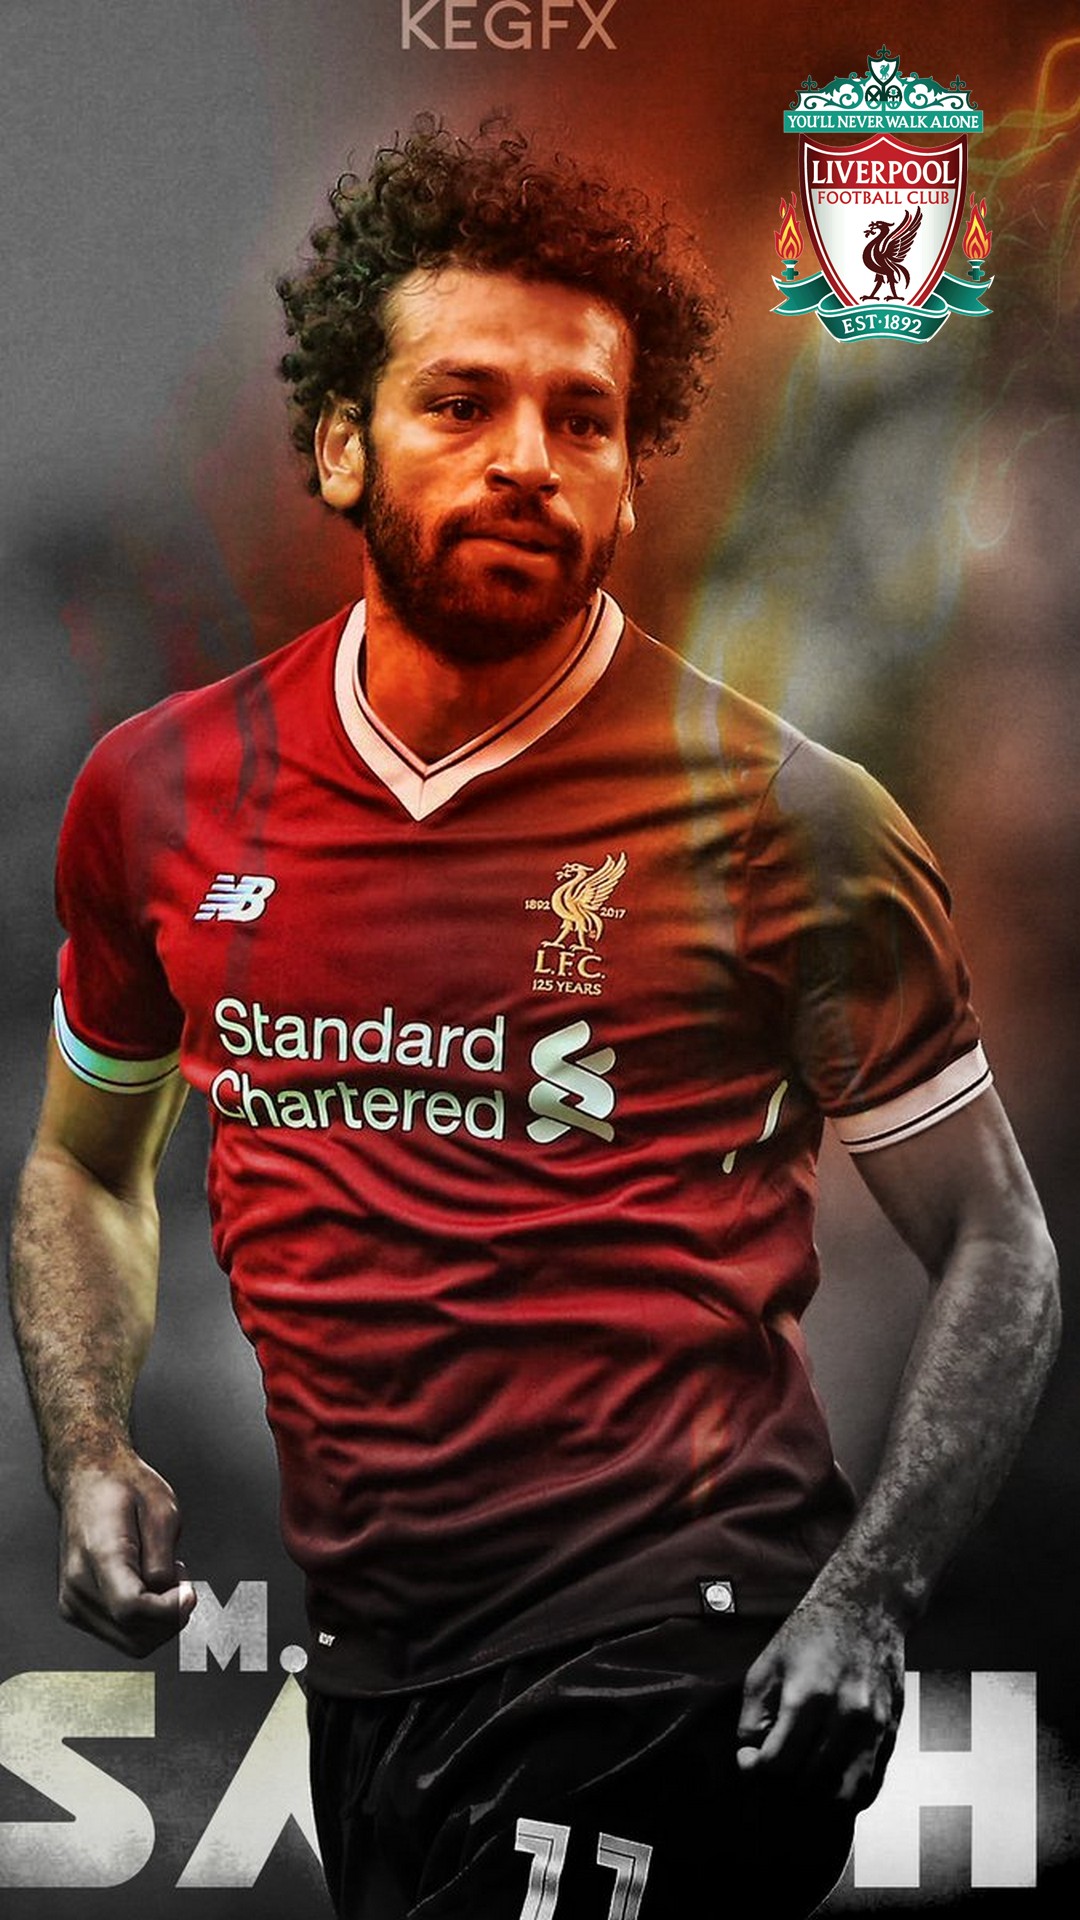 iPhone Wallpaper Salah Liverpool with image resolution 1080x1920 pixel. You can make this wallpaper for your iPhone 5, 6, 7, 8, X backgrounds, Mobile Screensaver, or iPad Lock Screen